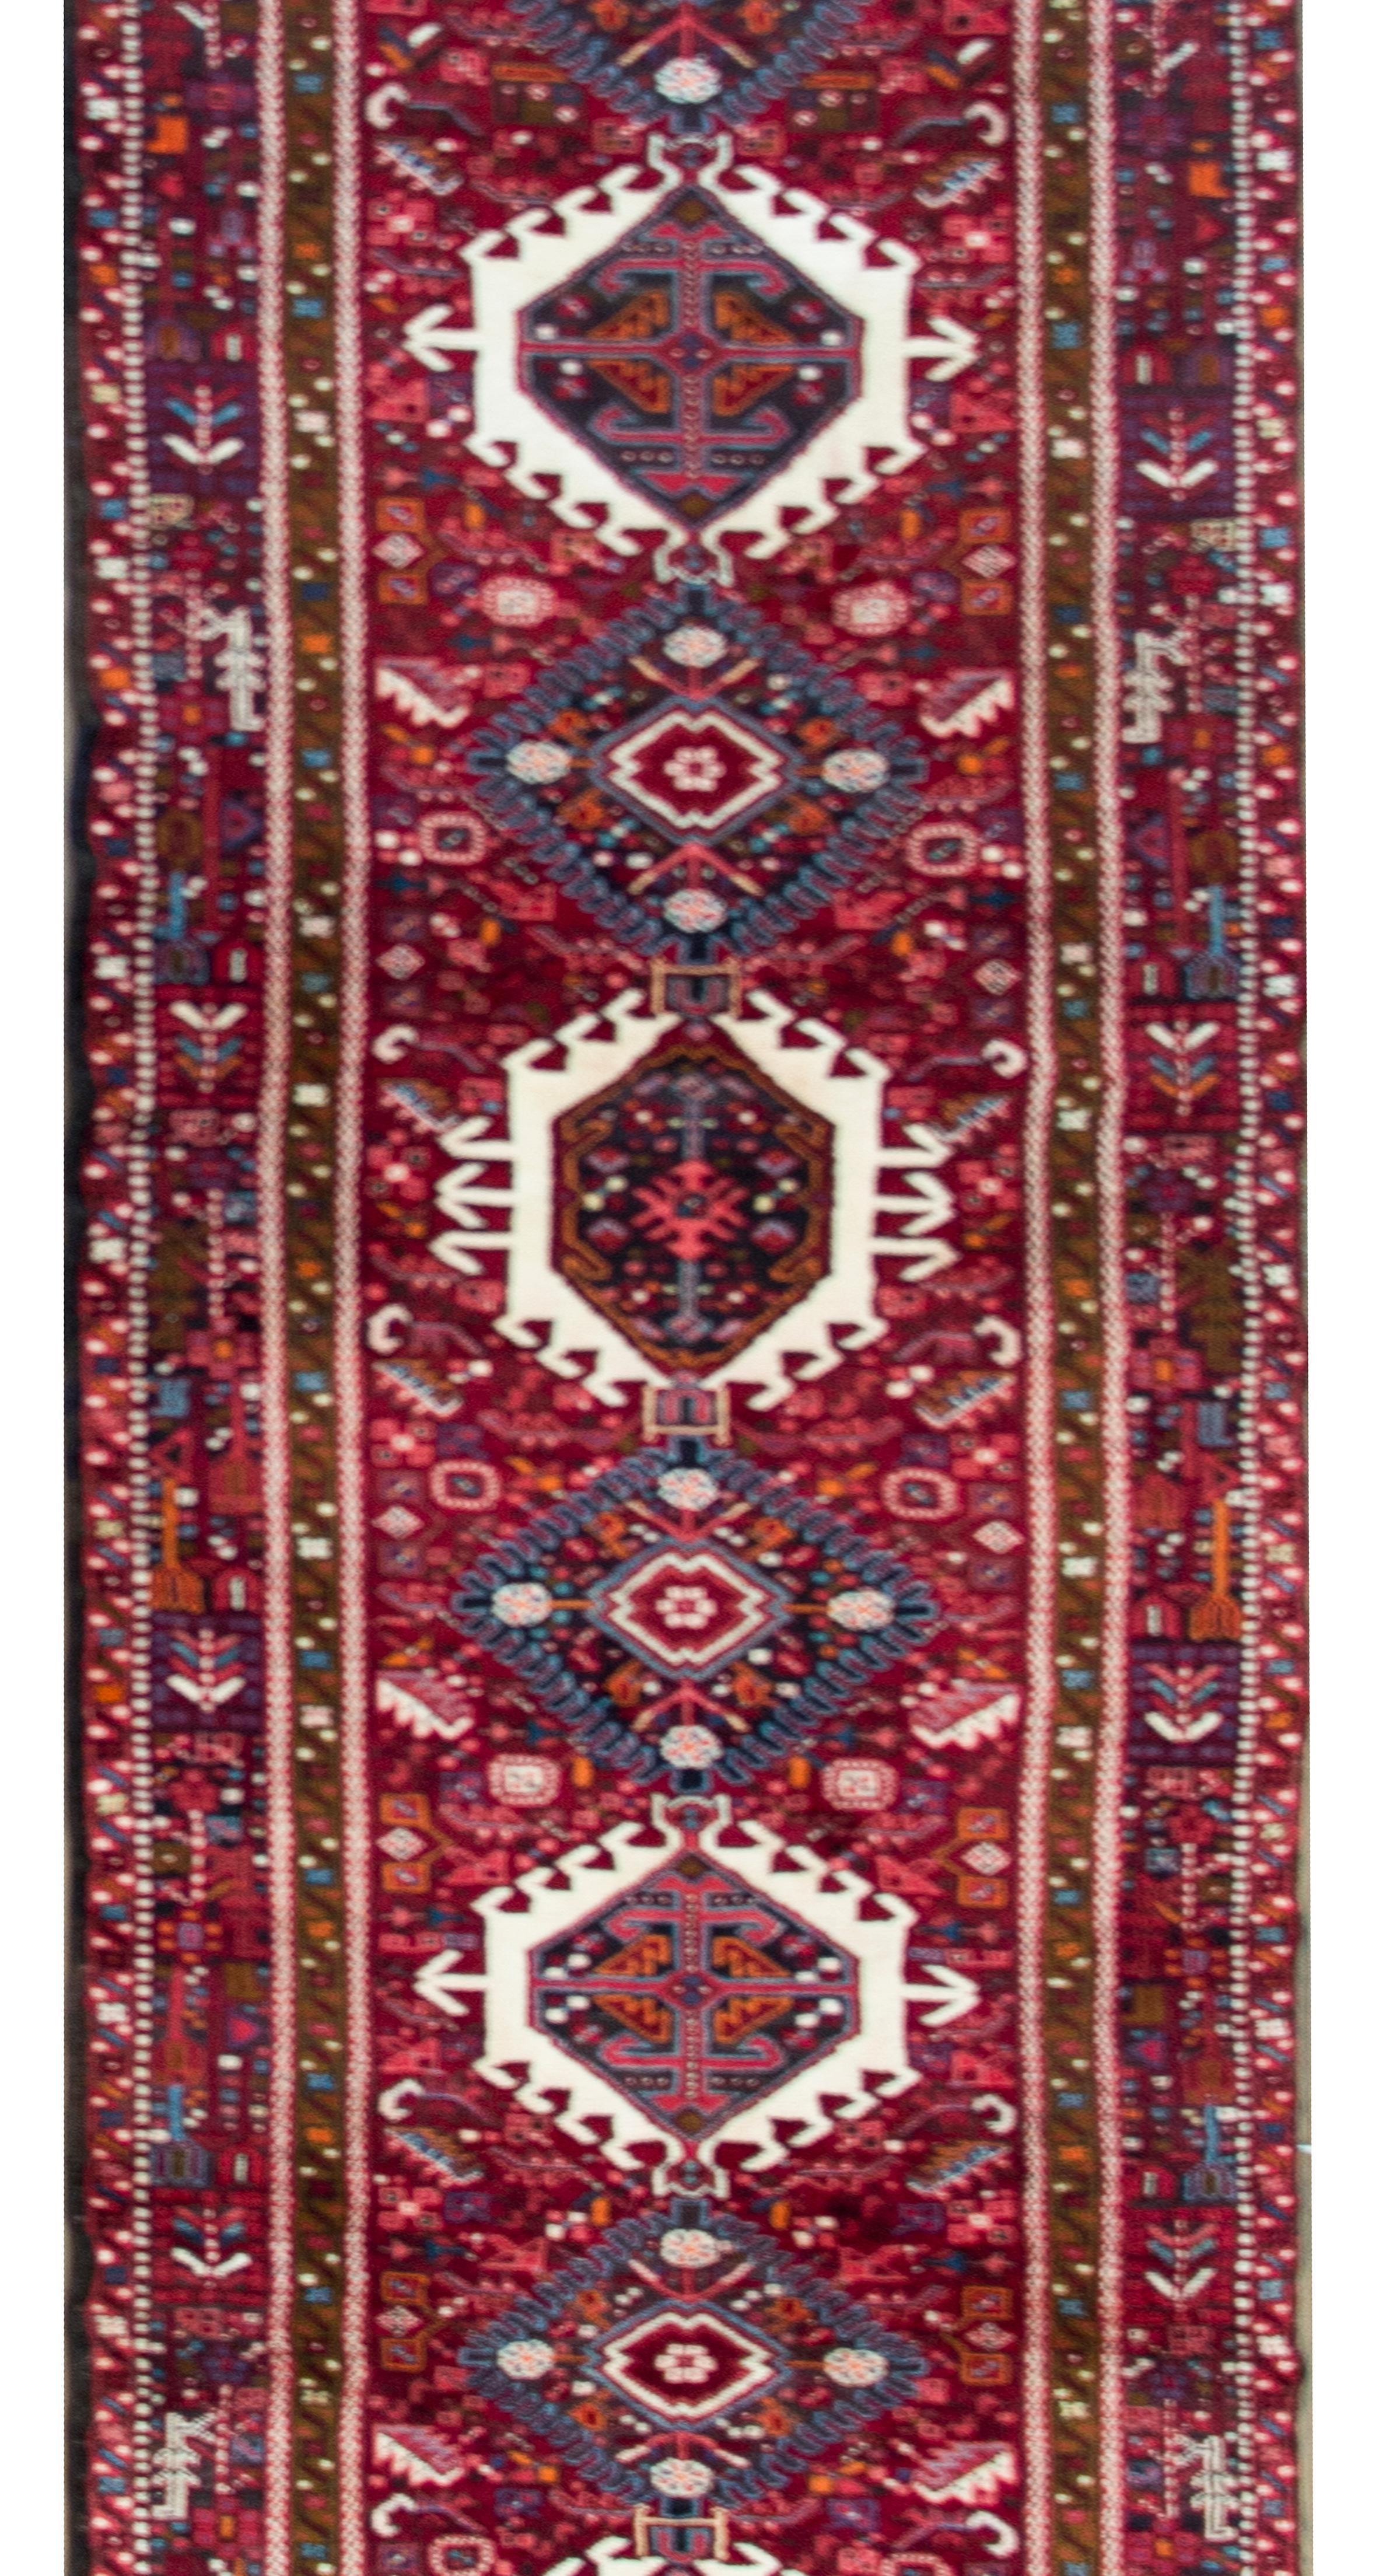 A beautiful MId-20th century Persian Heriz runner with several large stylized floral medallions living amidst a densely woven field of flowers, and surrounded by a complex floral and paisley border woven in myriad colors including crimson, gold,